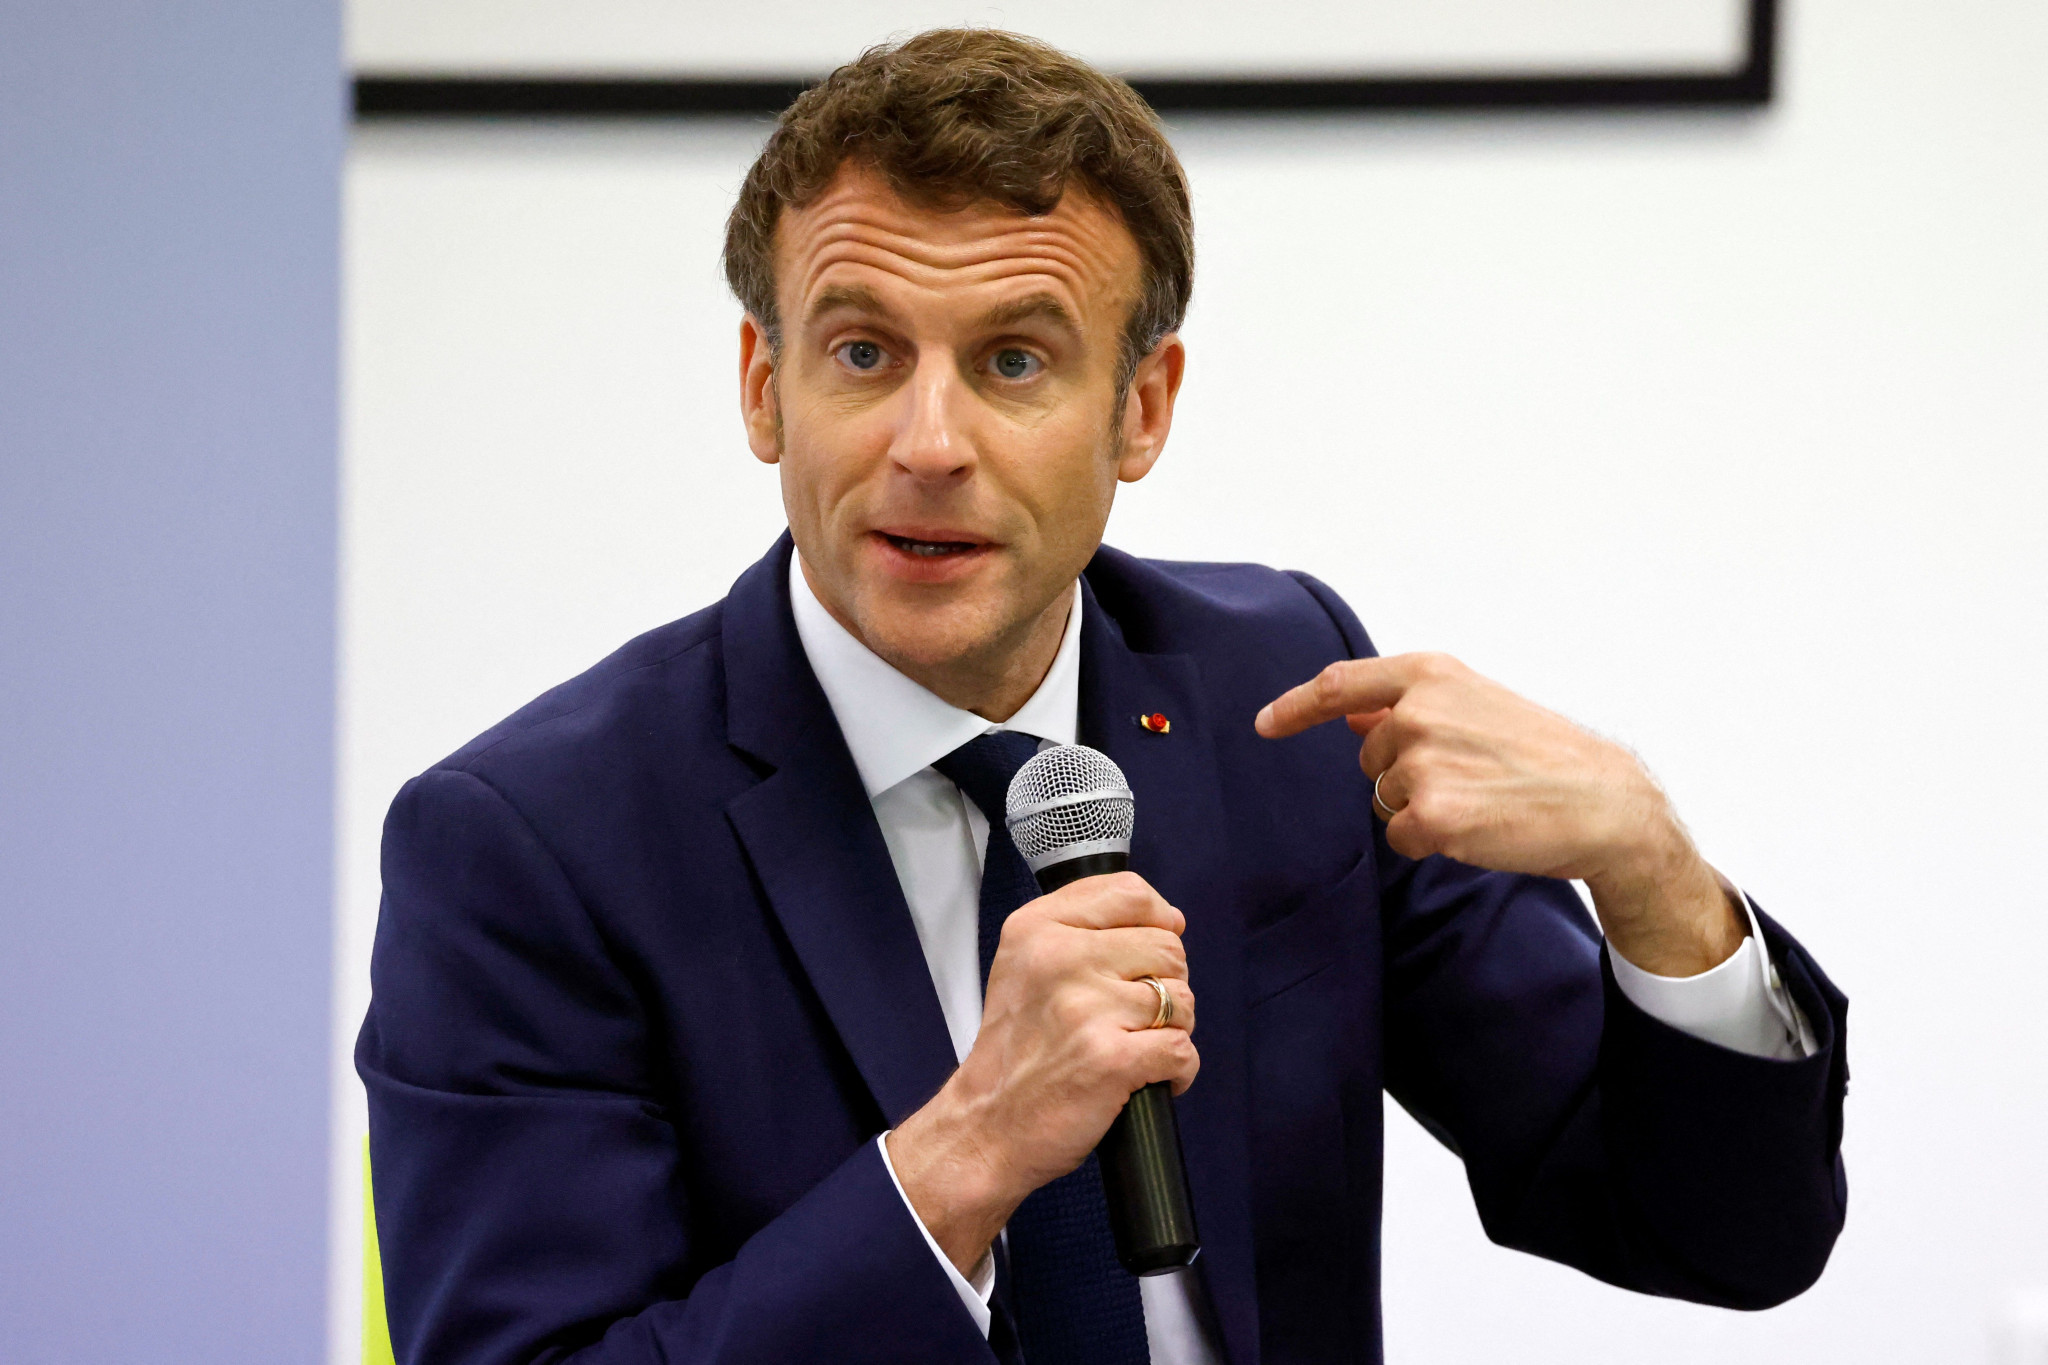 French National Olympic and Sports Committee calls for public to vote for Macron in second round of Presidential election